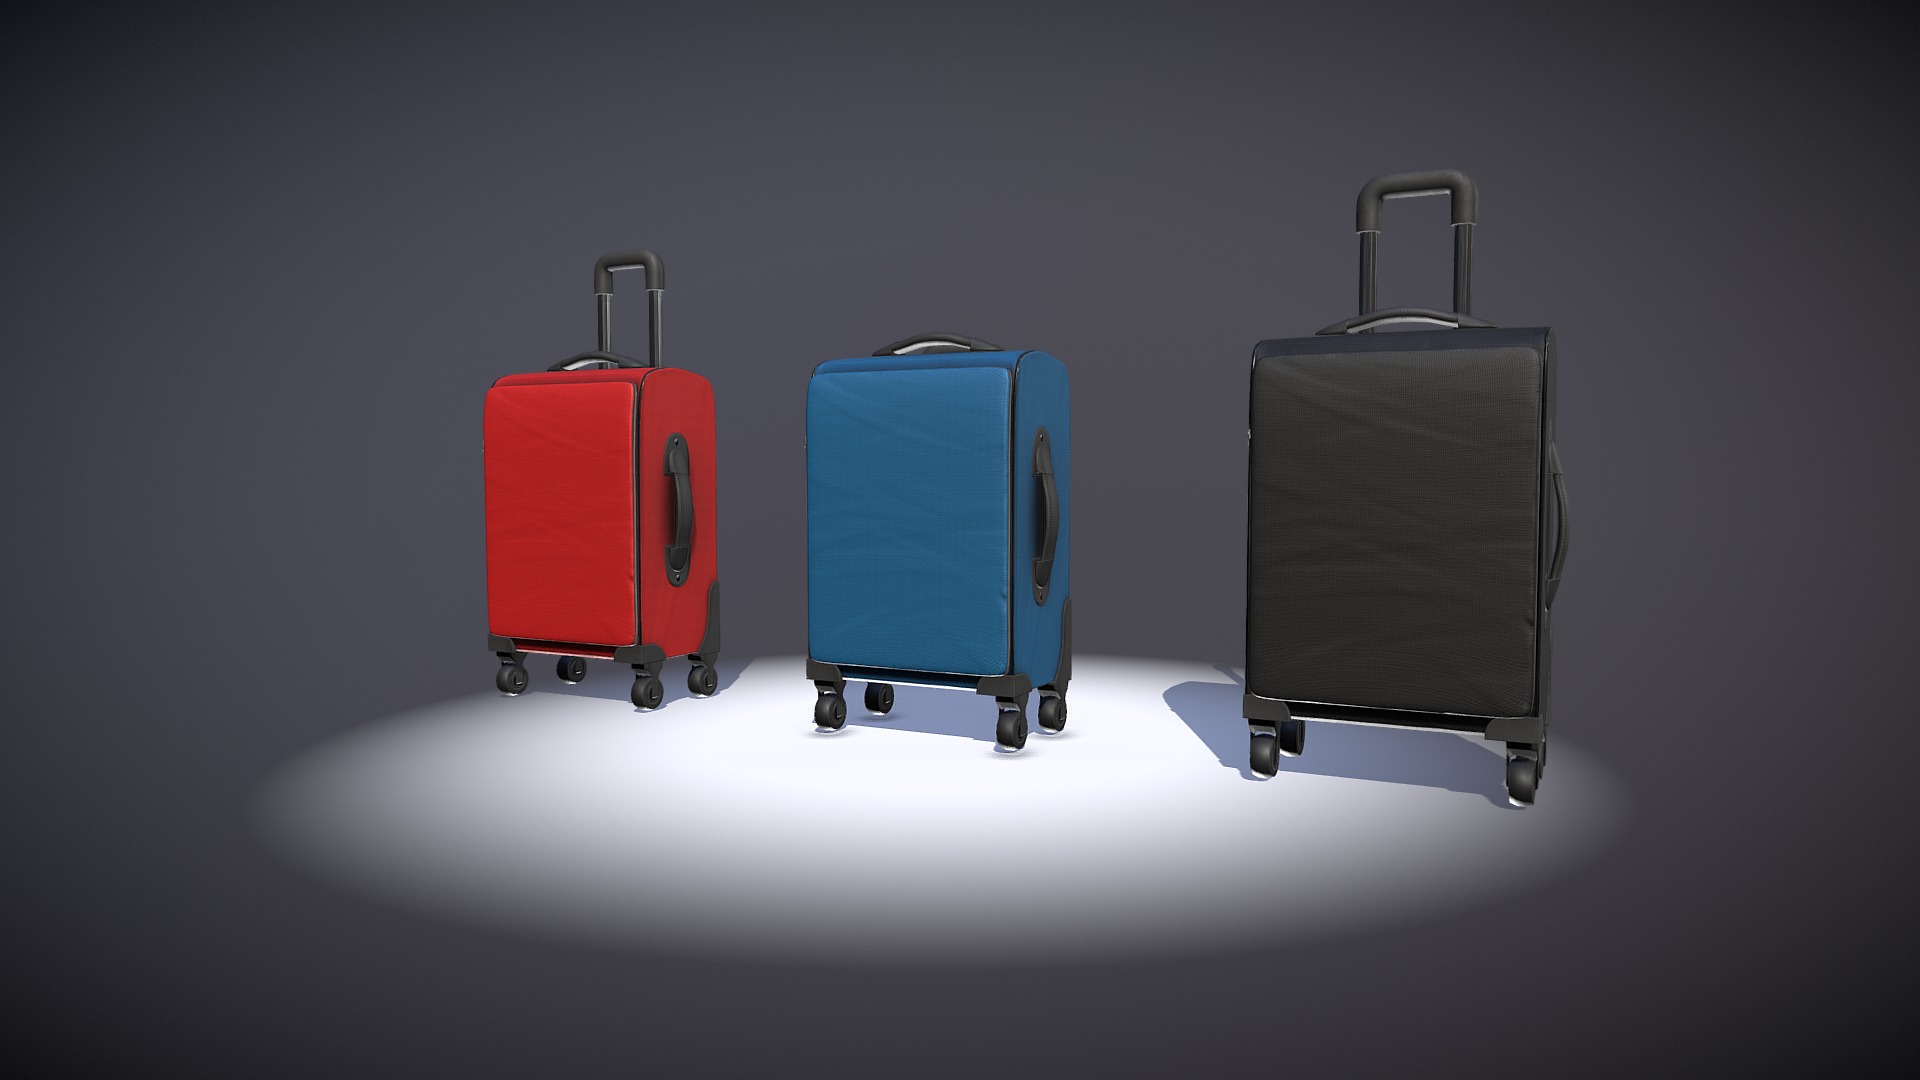 3D model Luggage 04 - This is a 3D model of the Luggage 04. The 3D model is about a few suitcases on wheels.